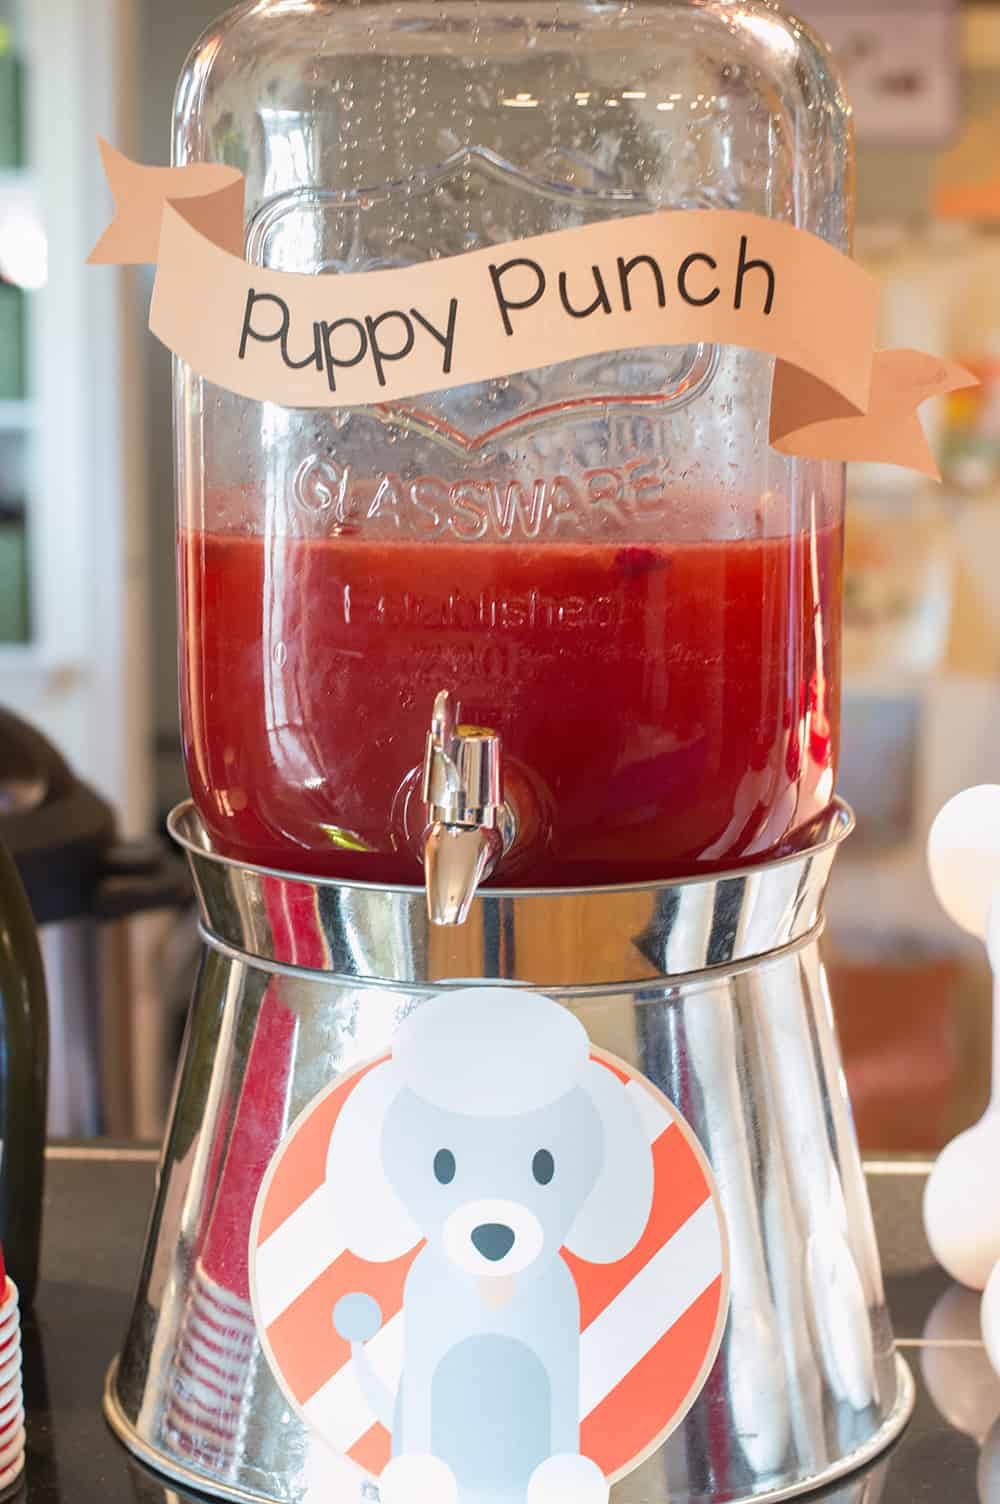 Puppy Party Punch served in Mason Jar Drink Dispenser from Oriental Trading